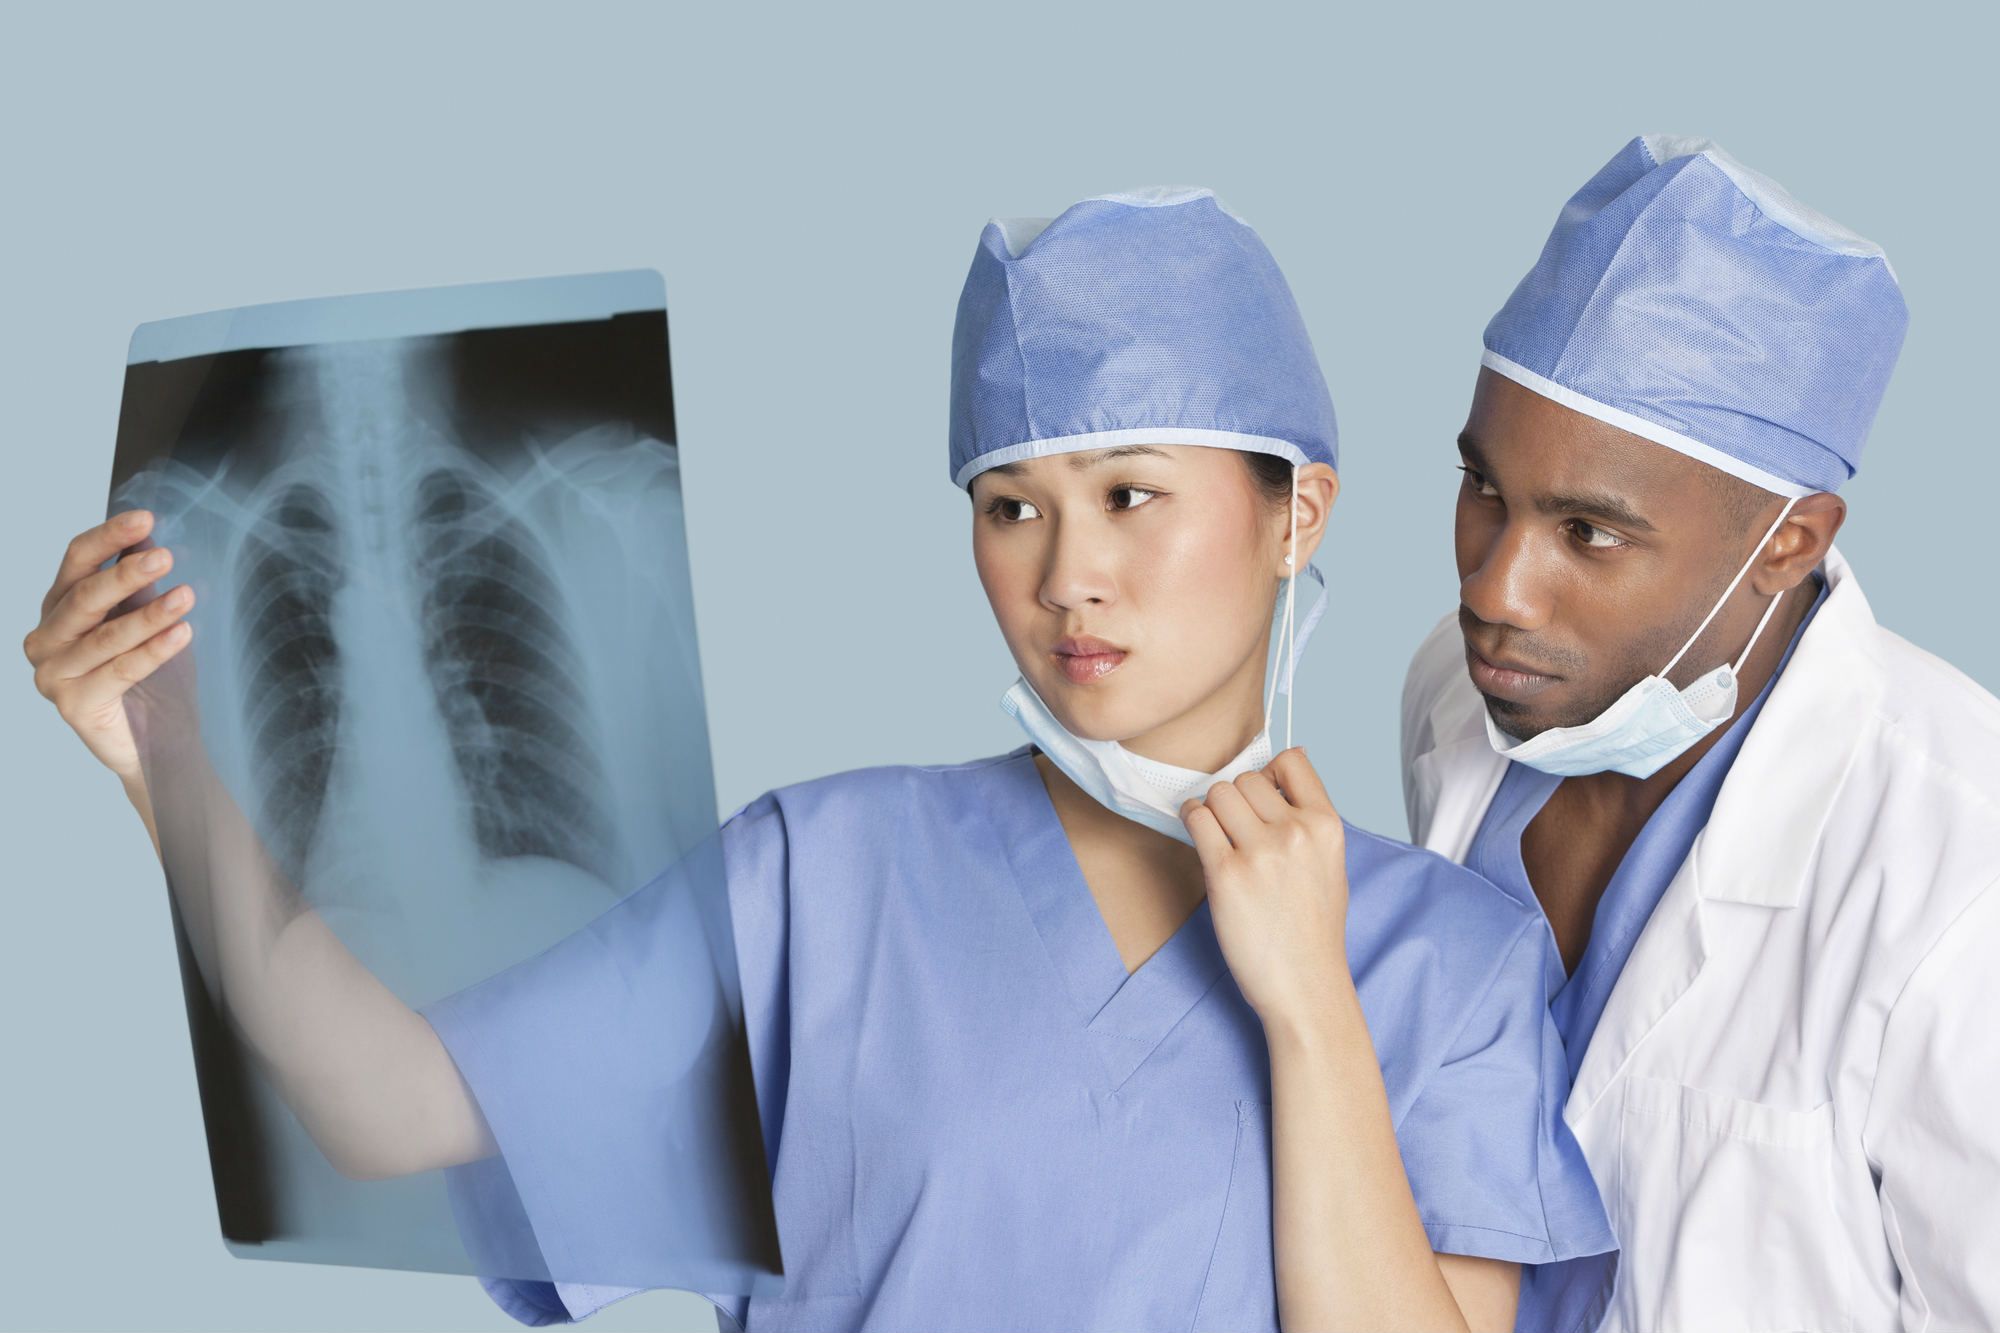 Surgeons looking at chest x-ray